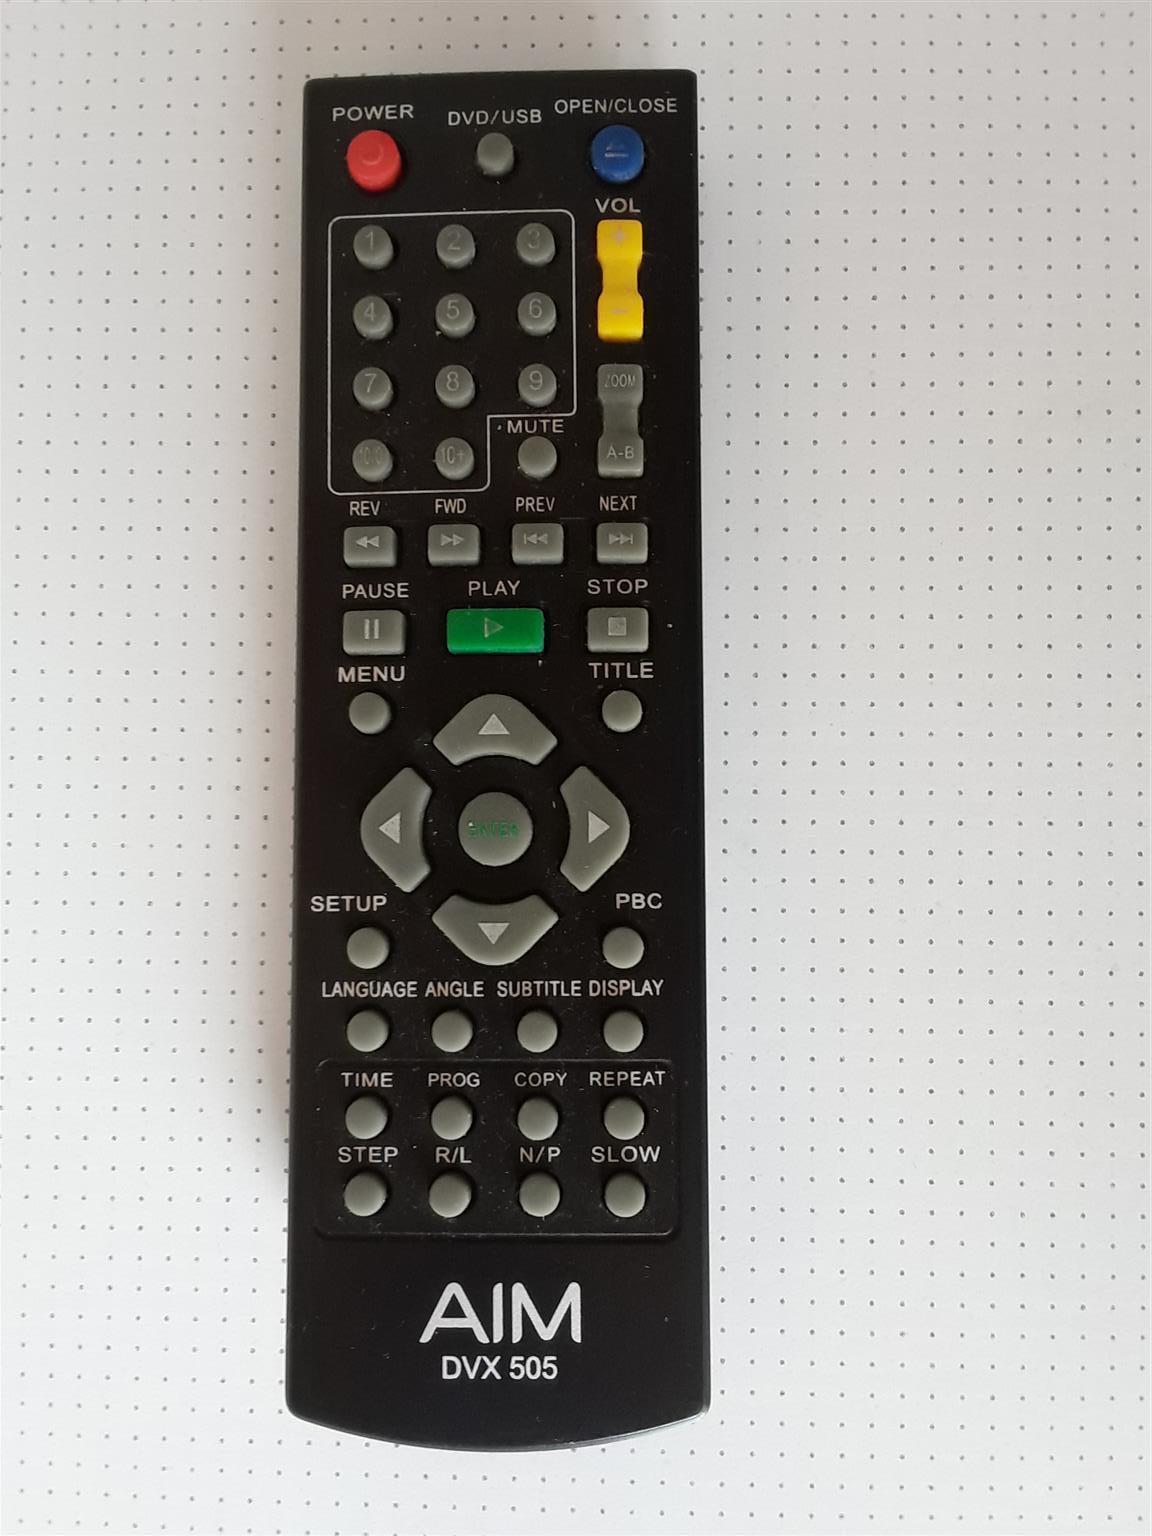 Remote Control AIM DVX 505 for DVD Player. In working condition. 